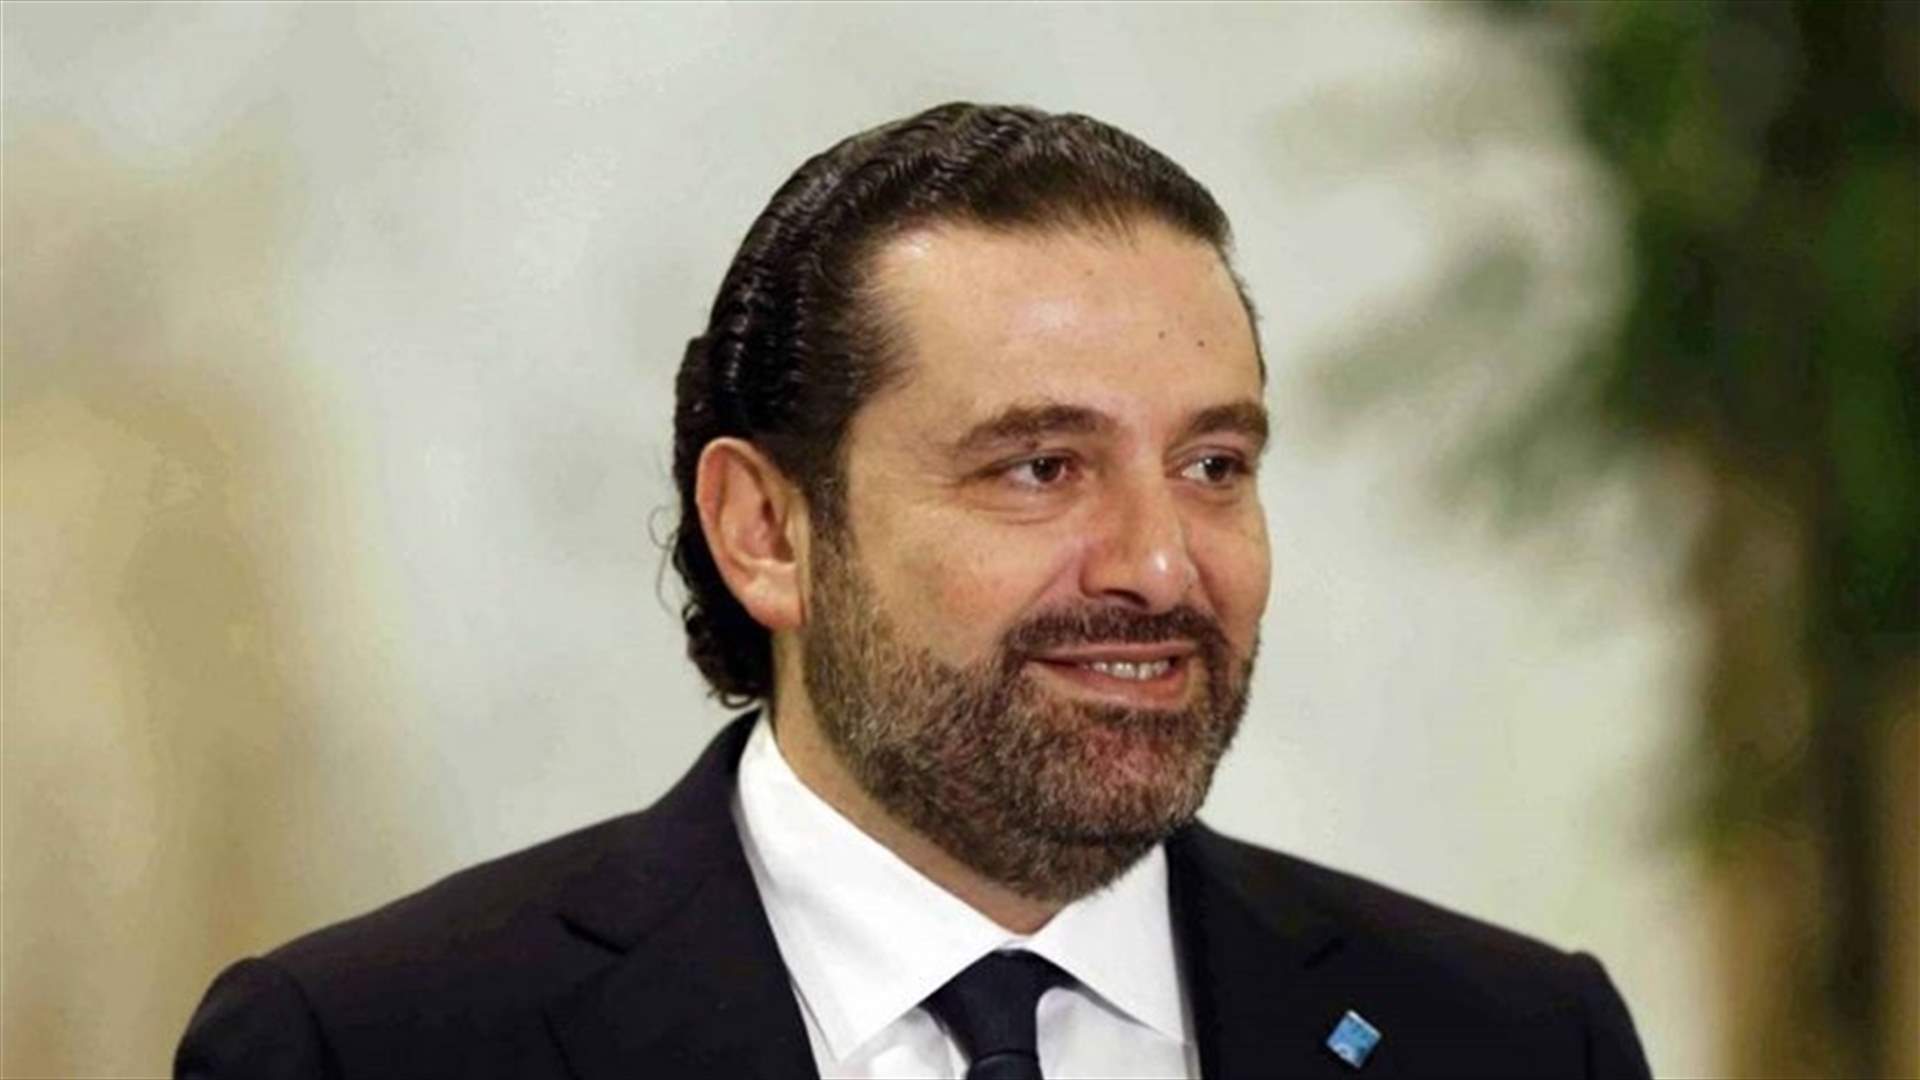 Hariri hopes to form cabinet that meets the aspirations of the Lebanese people